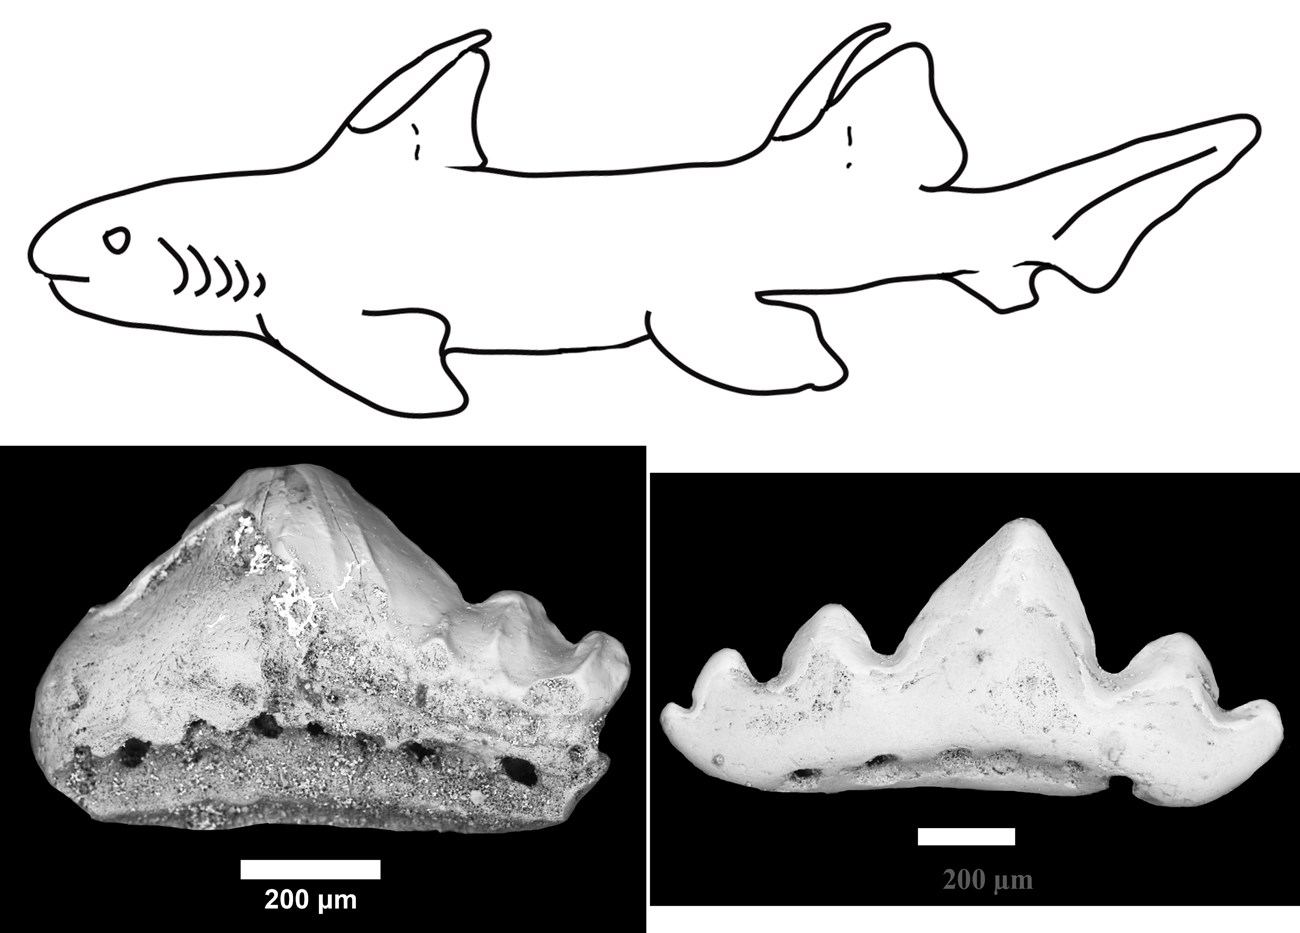 Protoacrodont shark with the holotypes of Microklomax carriea (left) and Novaculodus billingsleyi (right); scale equals 200 µm.